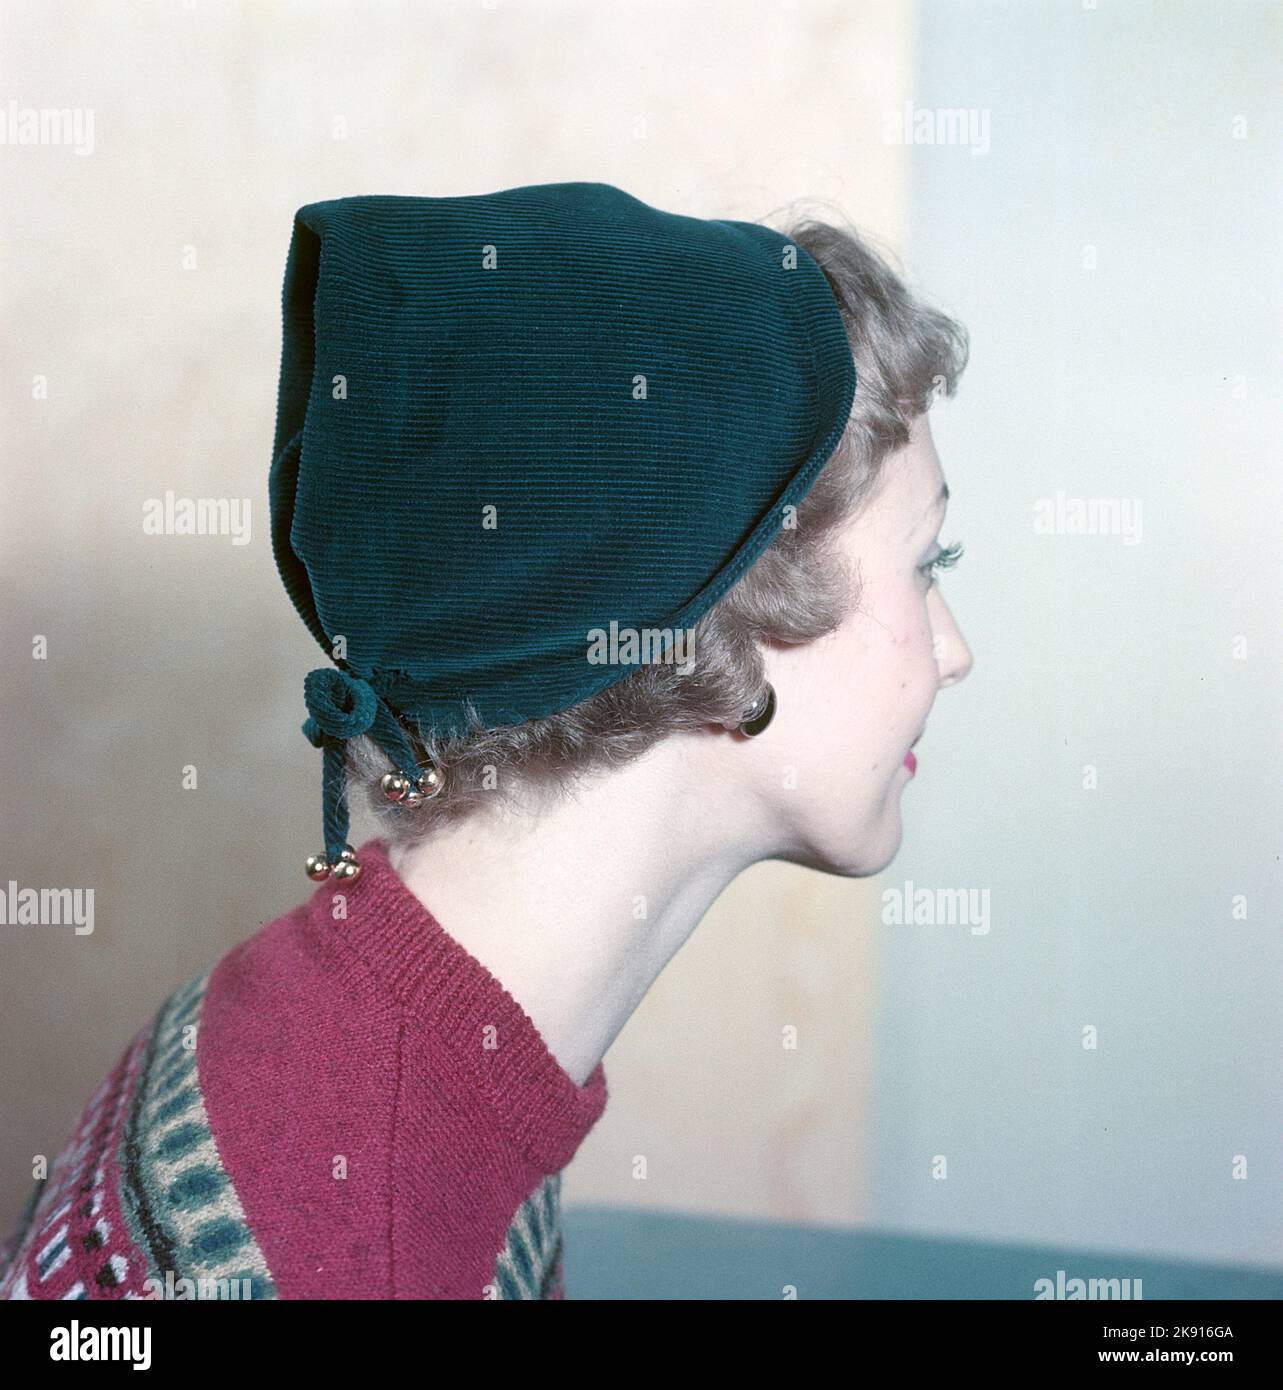 In the 1950s. A woman modelling a 1950s red knitted sweater with pattern and a matching fashionable hat. Sweden 1958 ref CV83 Stock Photo